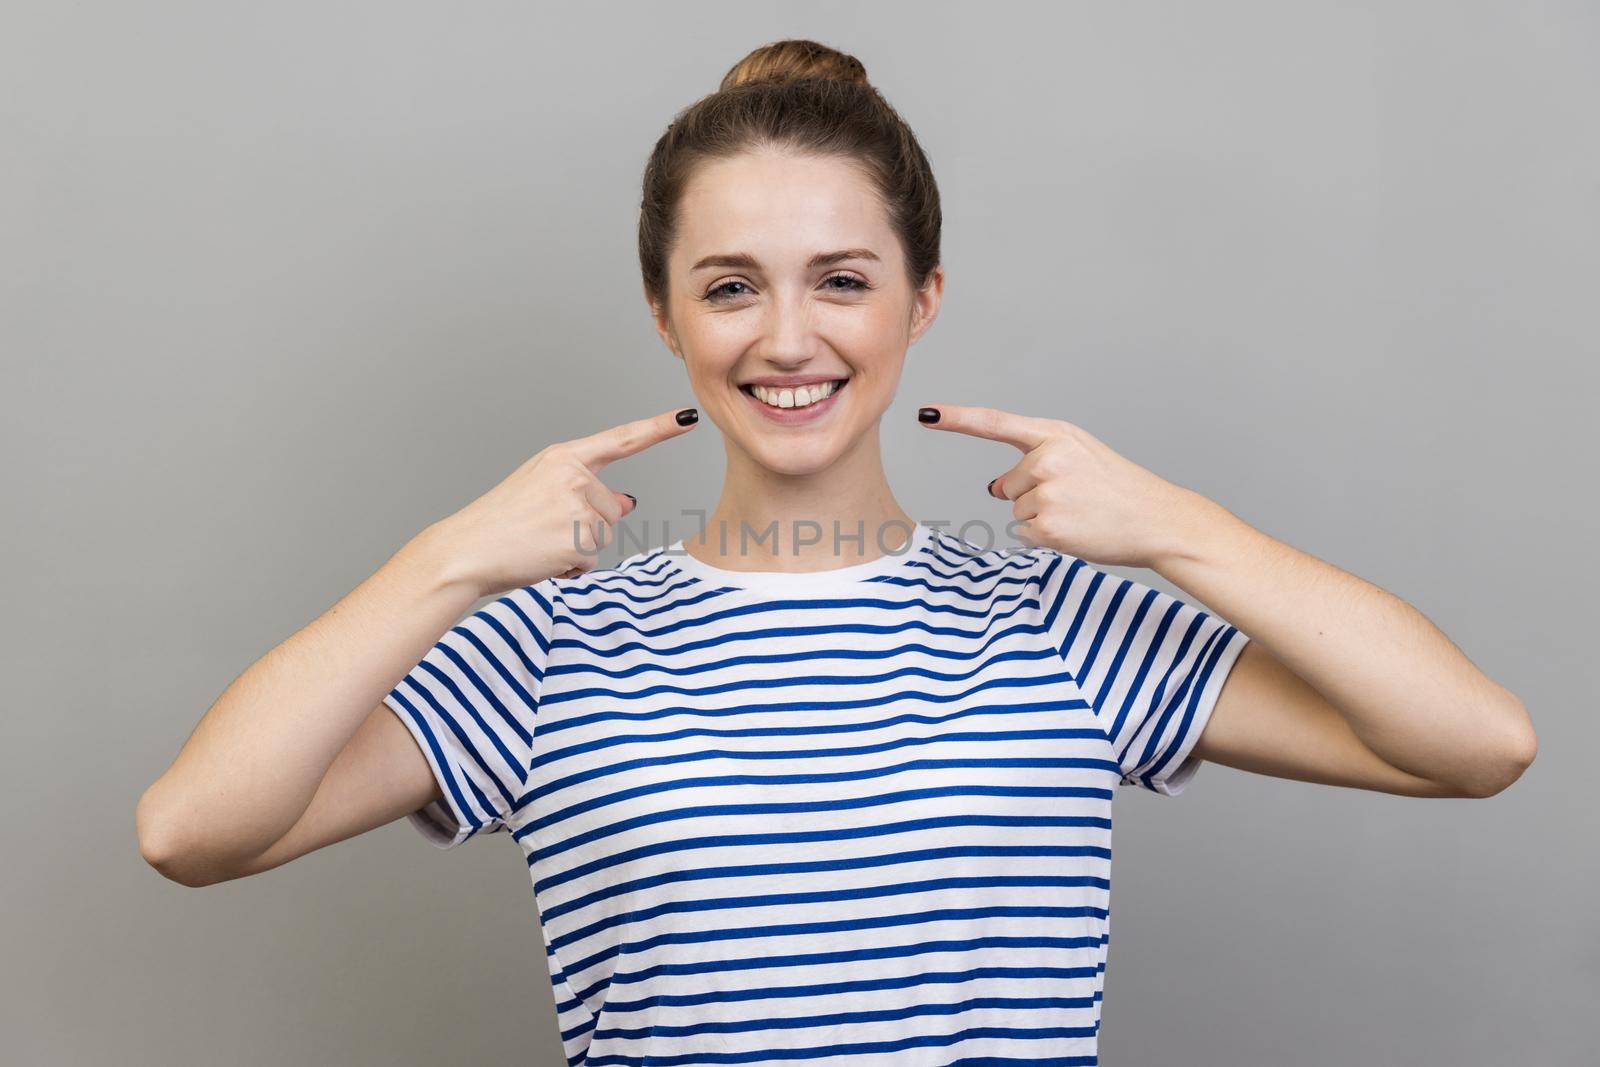 Portrait of pretty cheerful woman wearing striped T-shirt with bun hairstyle points index fingers at smile shows white teeth, looking at camera. Indoor studio shot isolated on gray background.